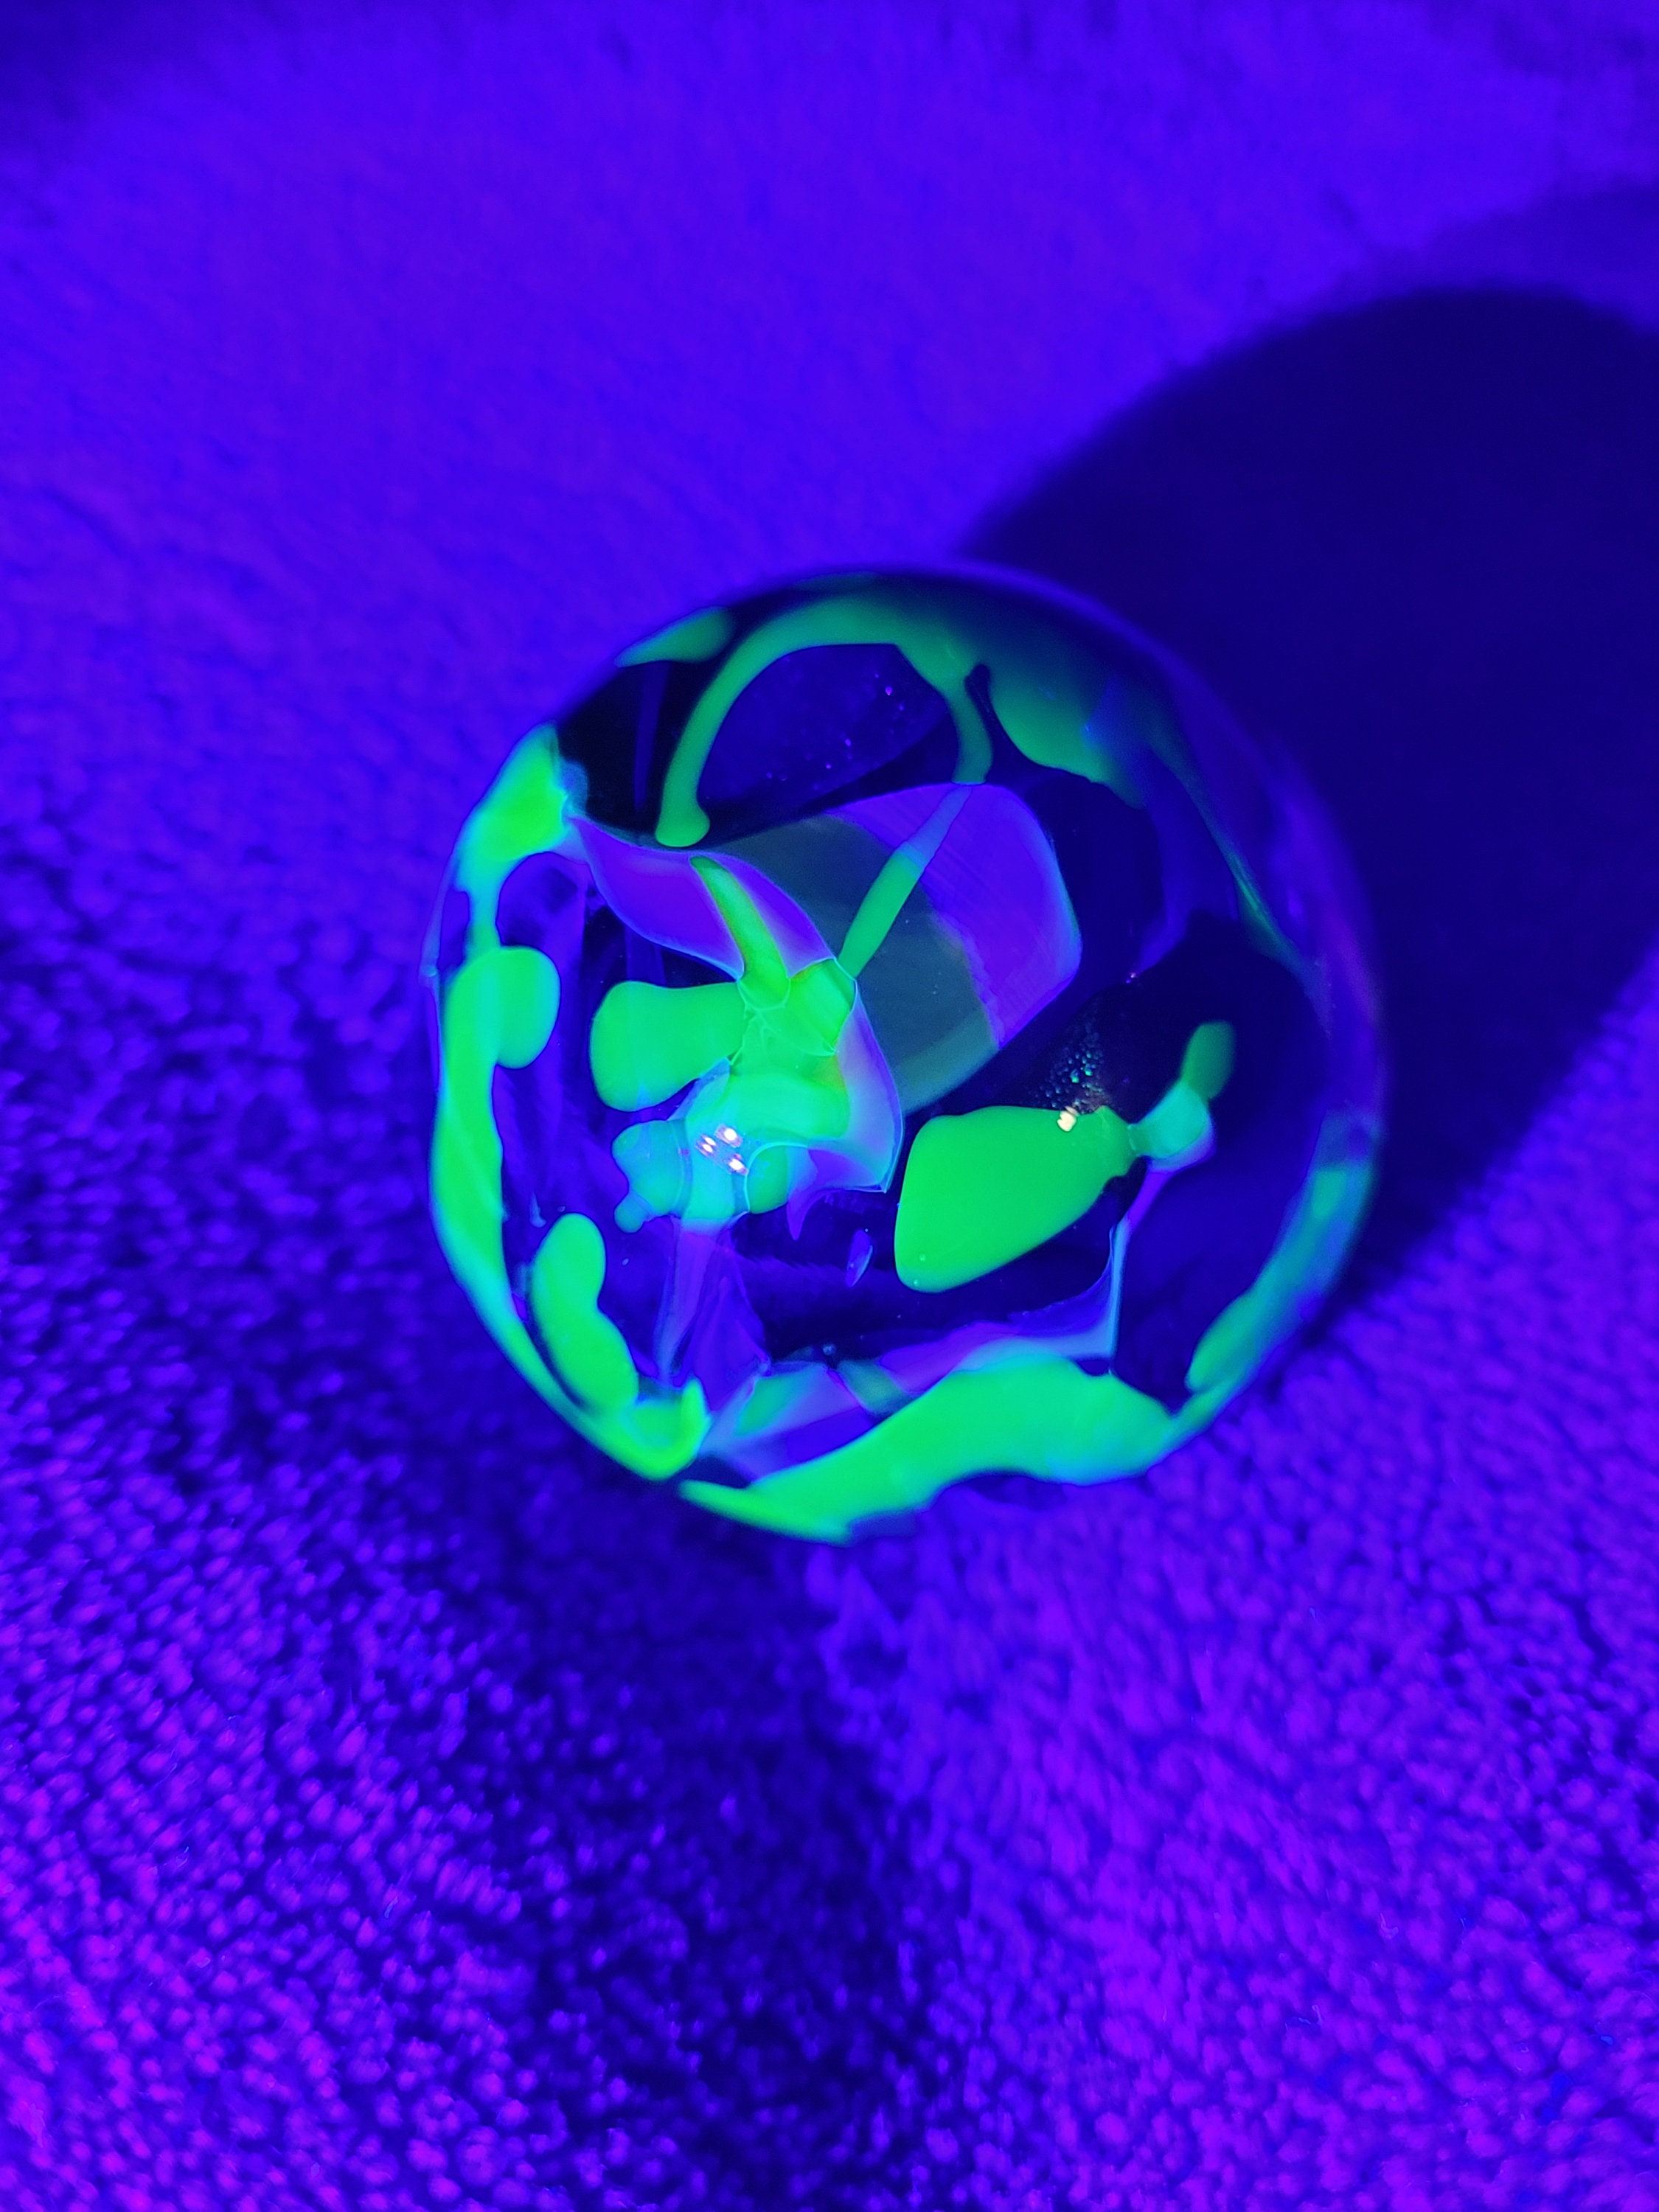 Received some marbles as a gift. They seem a little darker than normal  uranium glass but still fluoresce. The larger darker red marbles fluoresce  too although it's hard to see in the